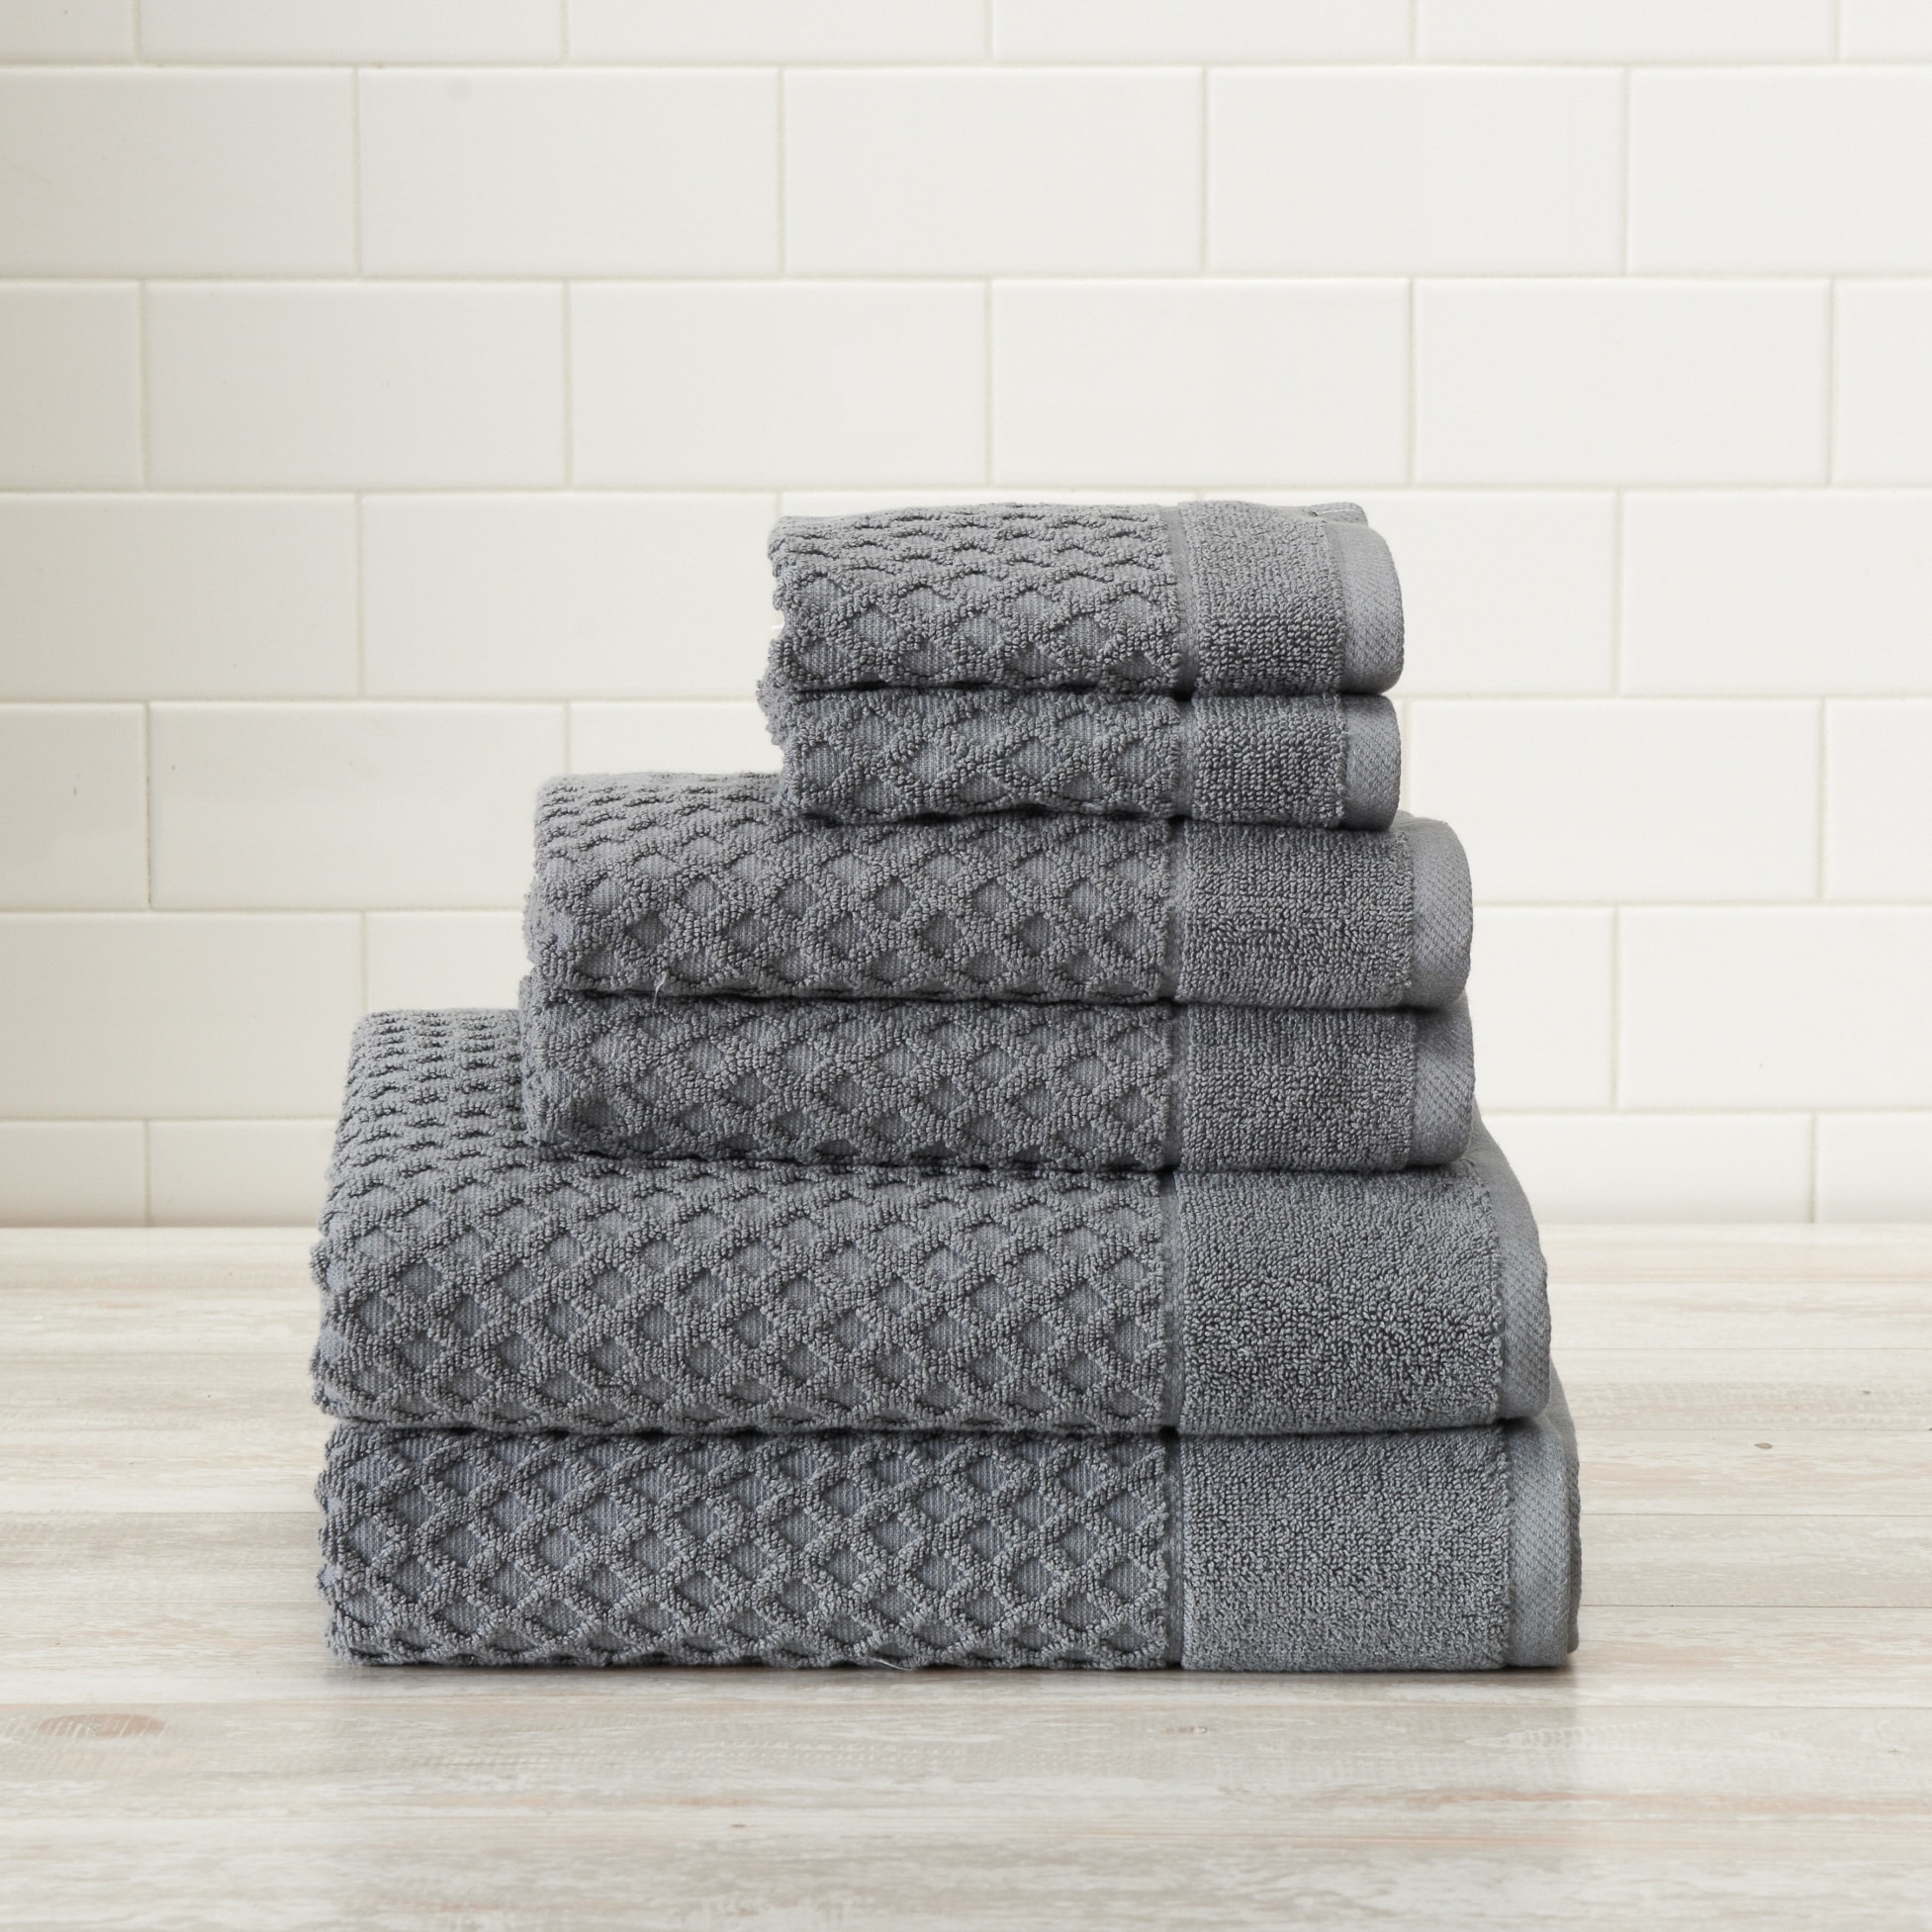 https://ak1.ostkcdn.com/images/products/is/images/direct/2c703ffe0eb8f638310face51486703b6f022f9a/Cotton-Textured-Towel-Set-Grayson-Collection.jpg